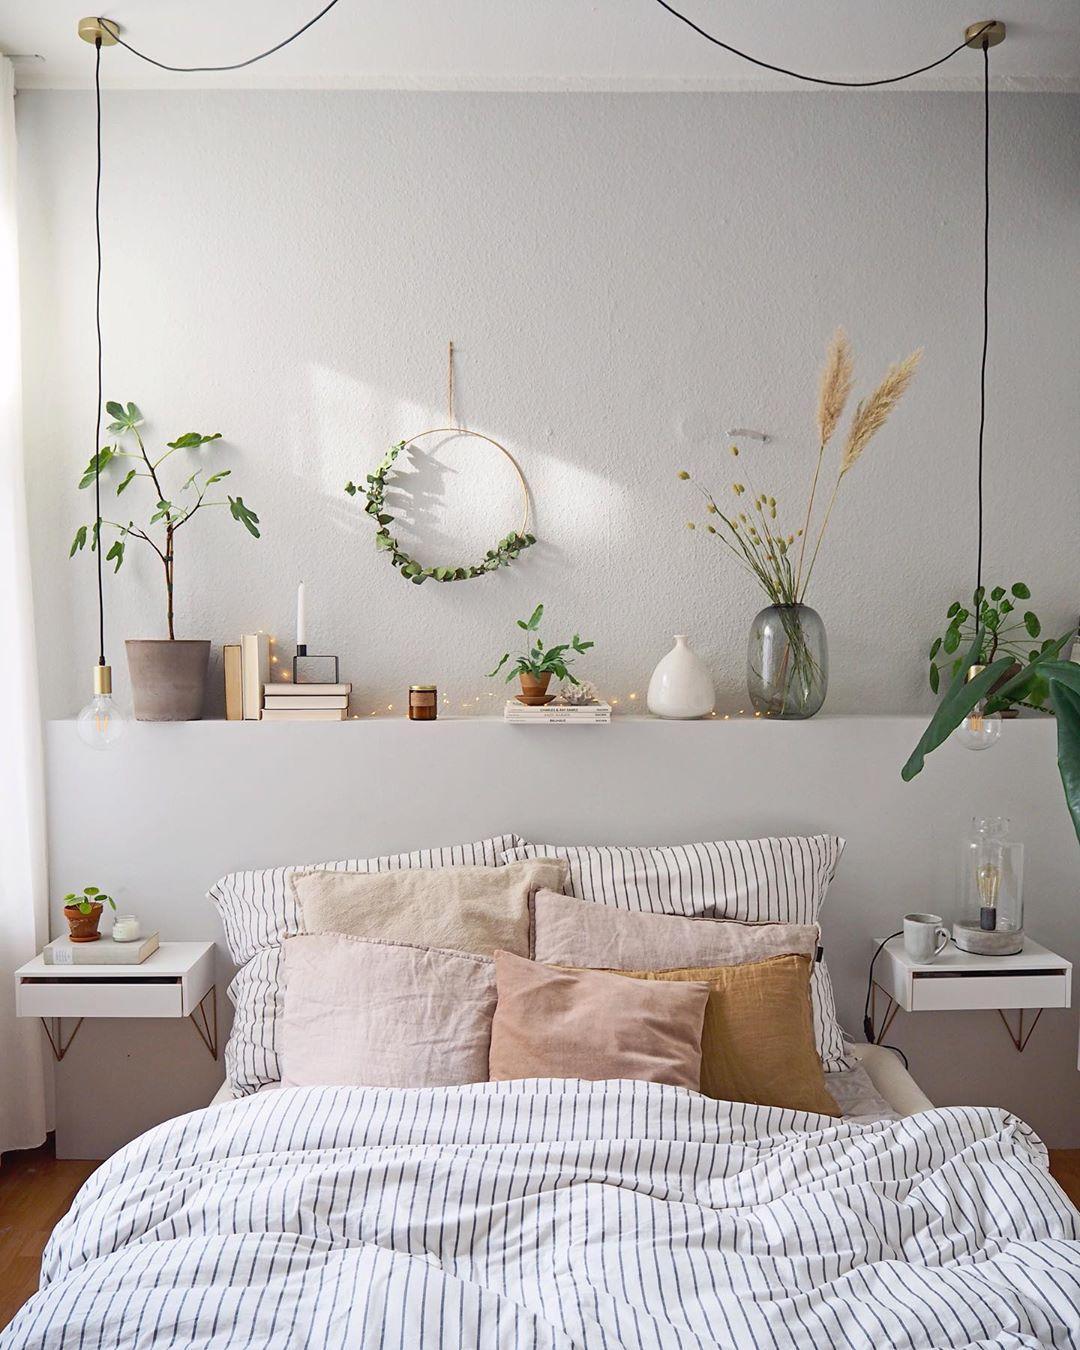 3 Ways to Brighten Up Small Spaces with Natural Elements